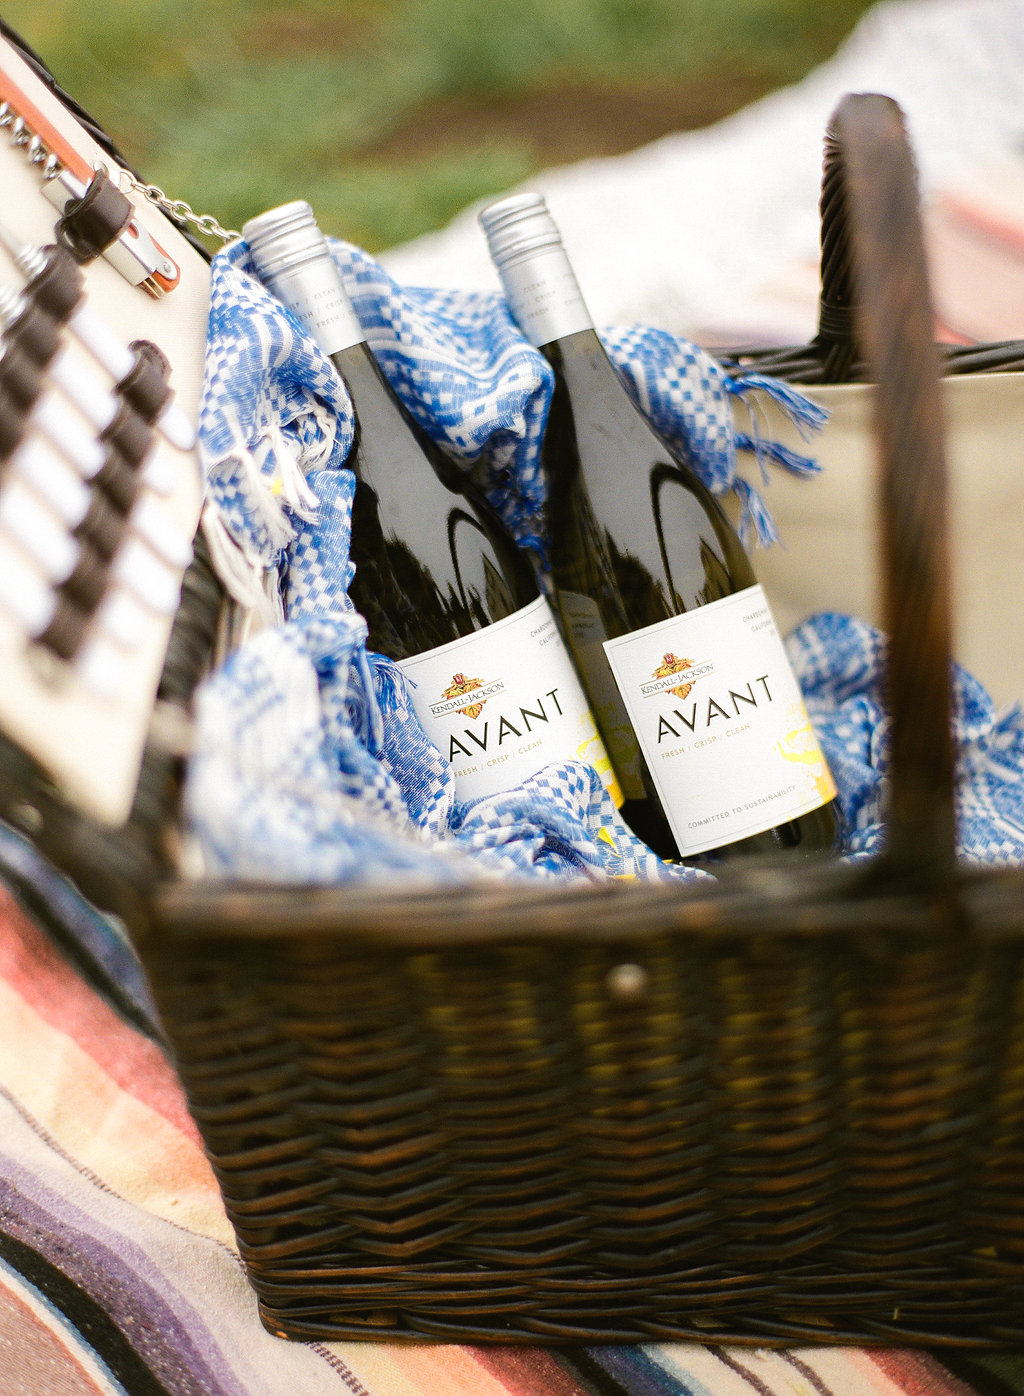 How to plan the Perfect Summer Picnic #KJAVANT